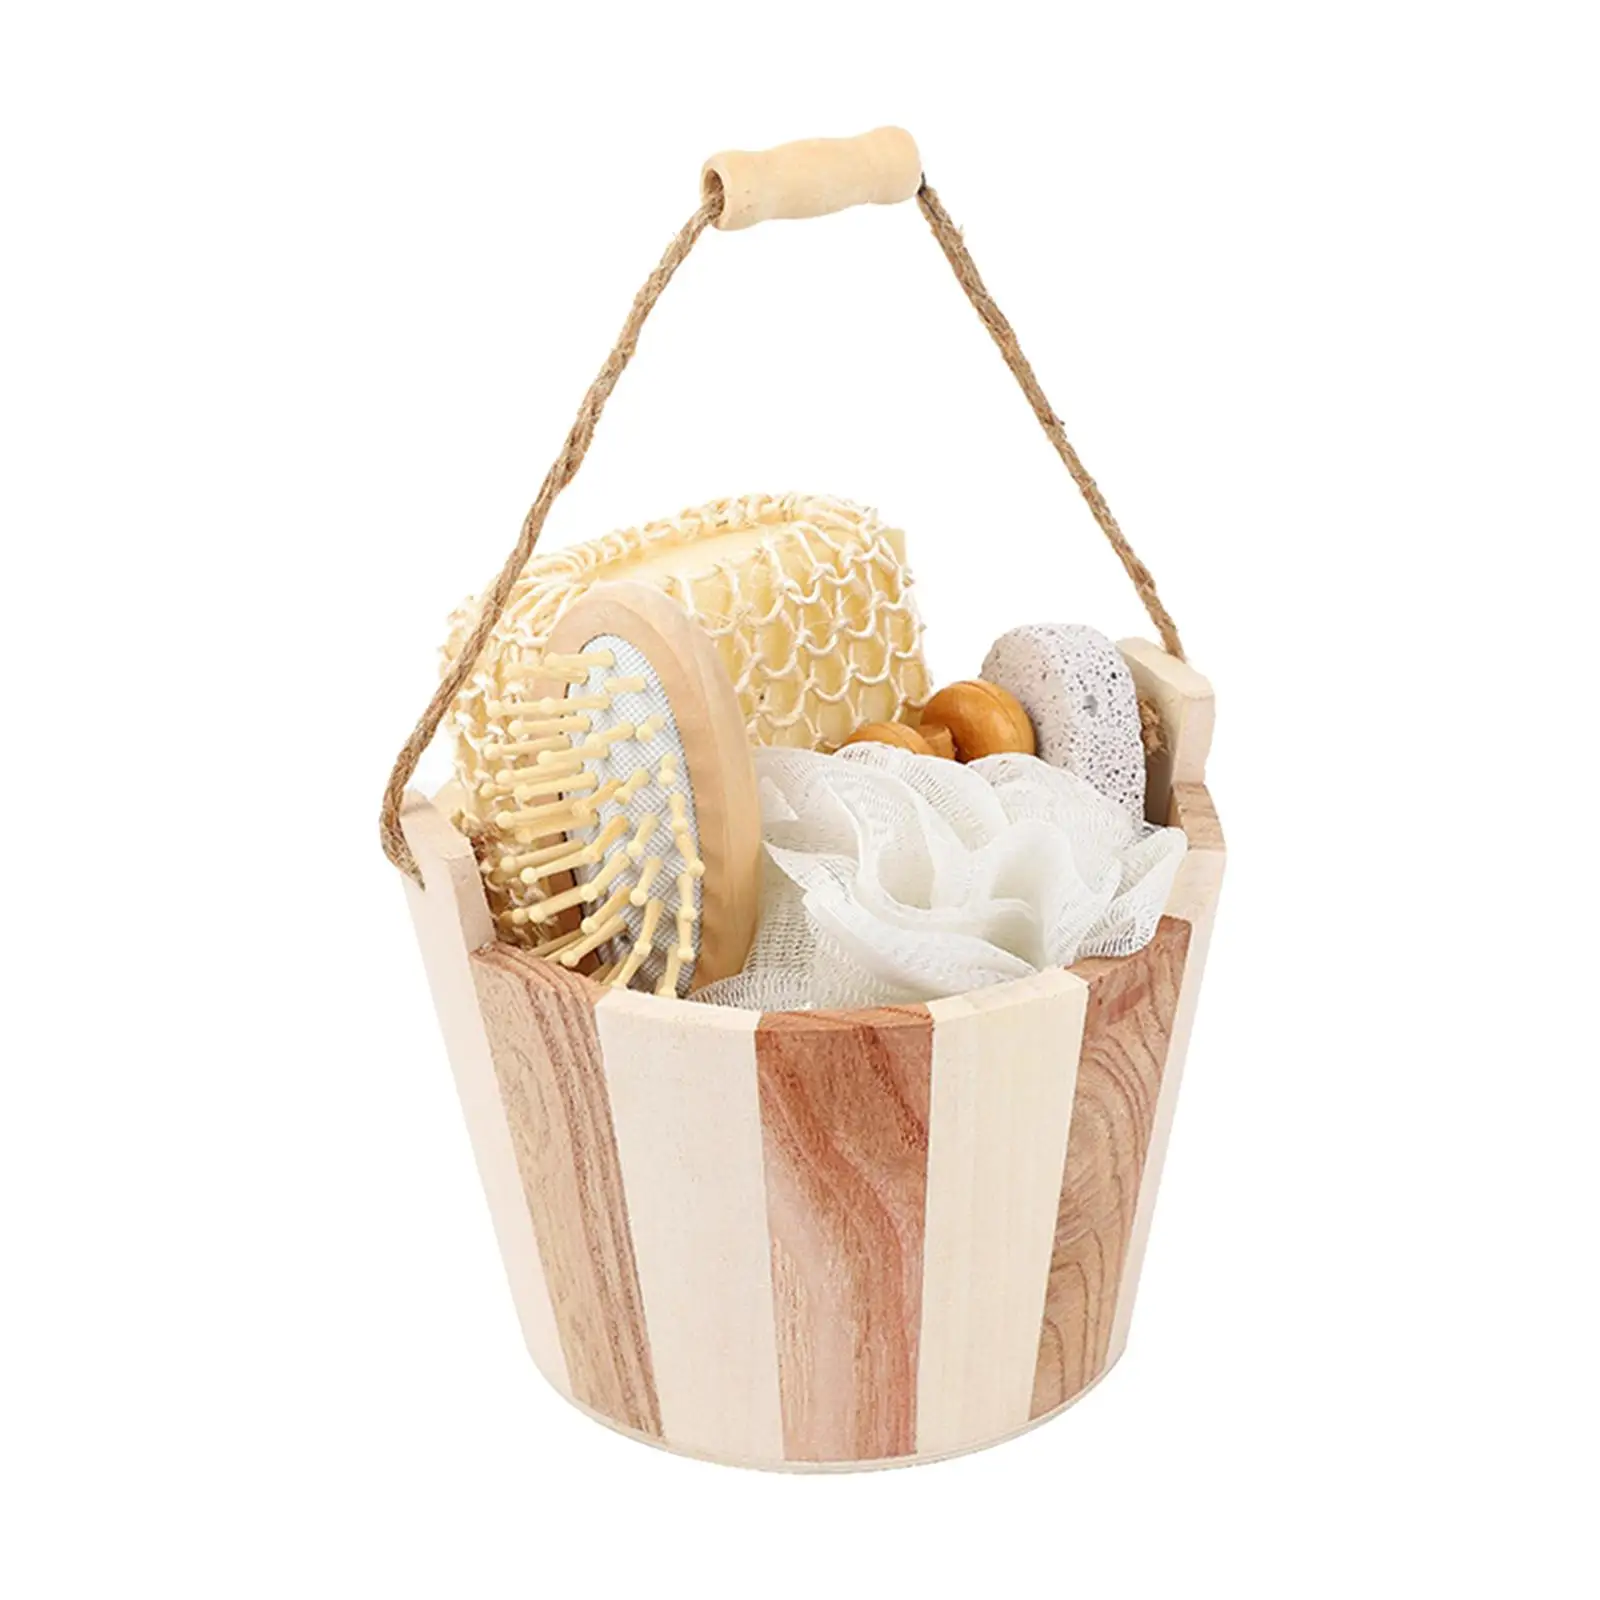 Portable Body Brush Set Comb Facial  Wooden Bucket for Boy Man Girls images - 6